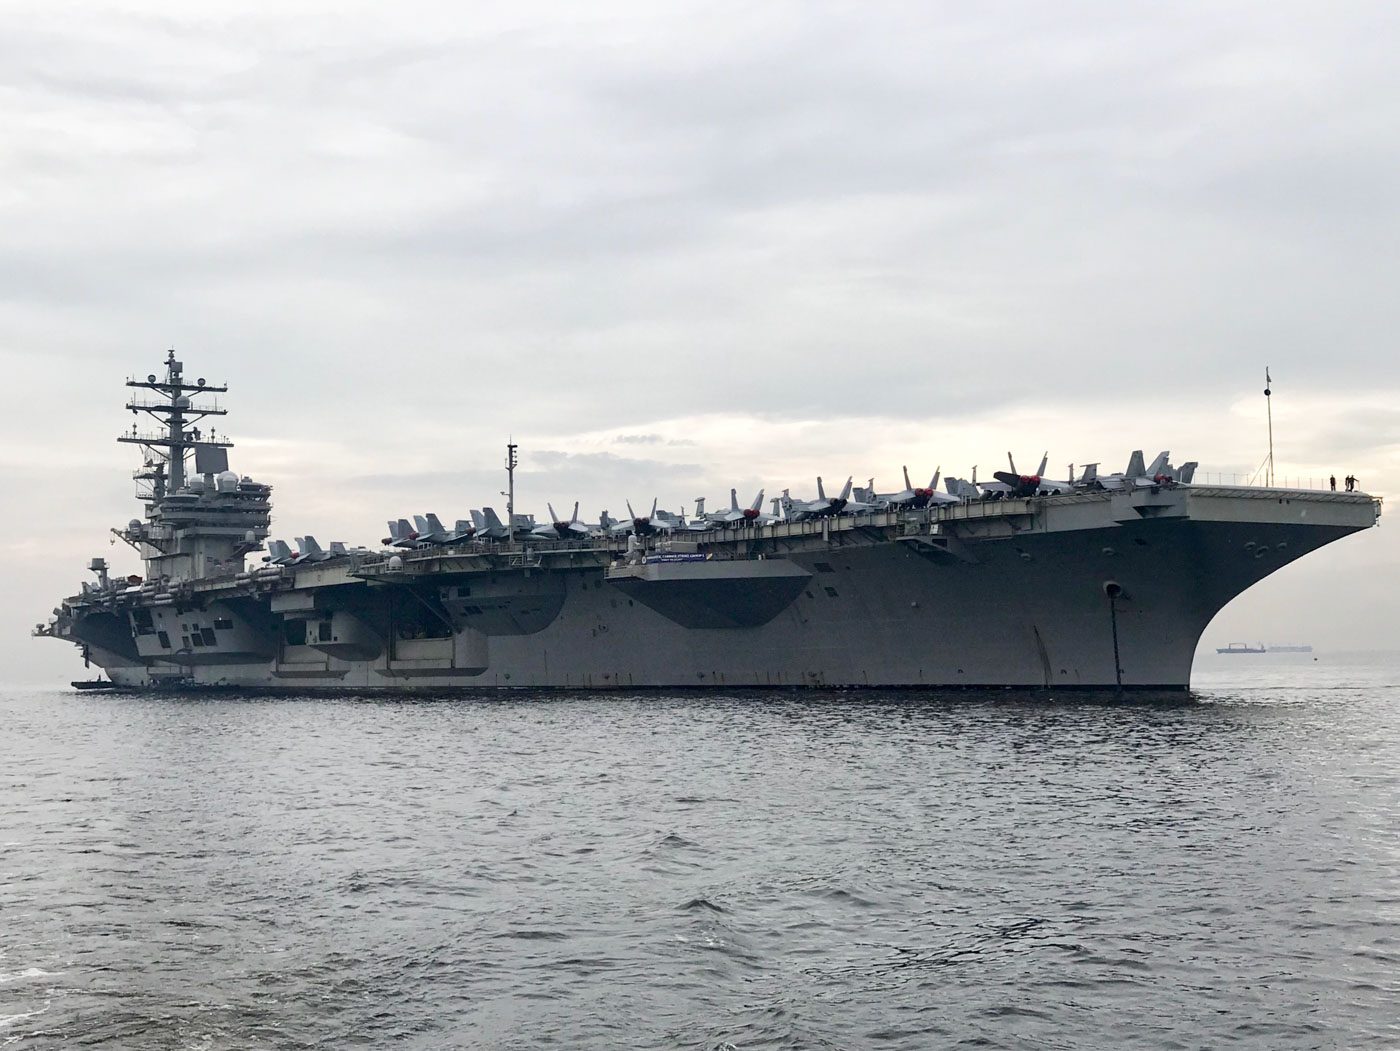 USS Ronald Reagan in the Philippines after South China Sea patrol